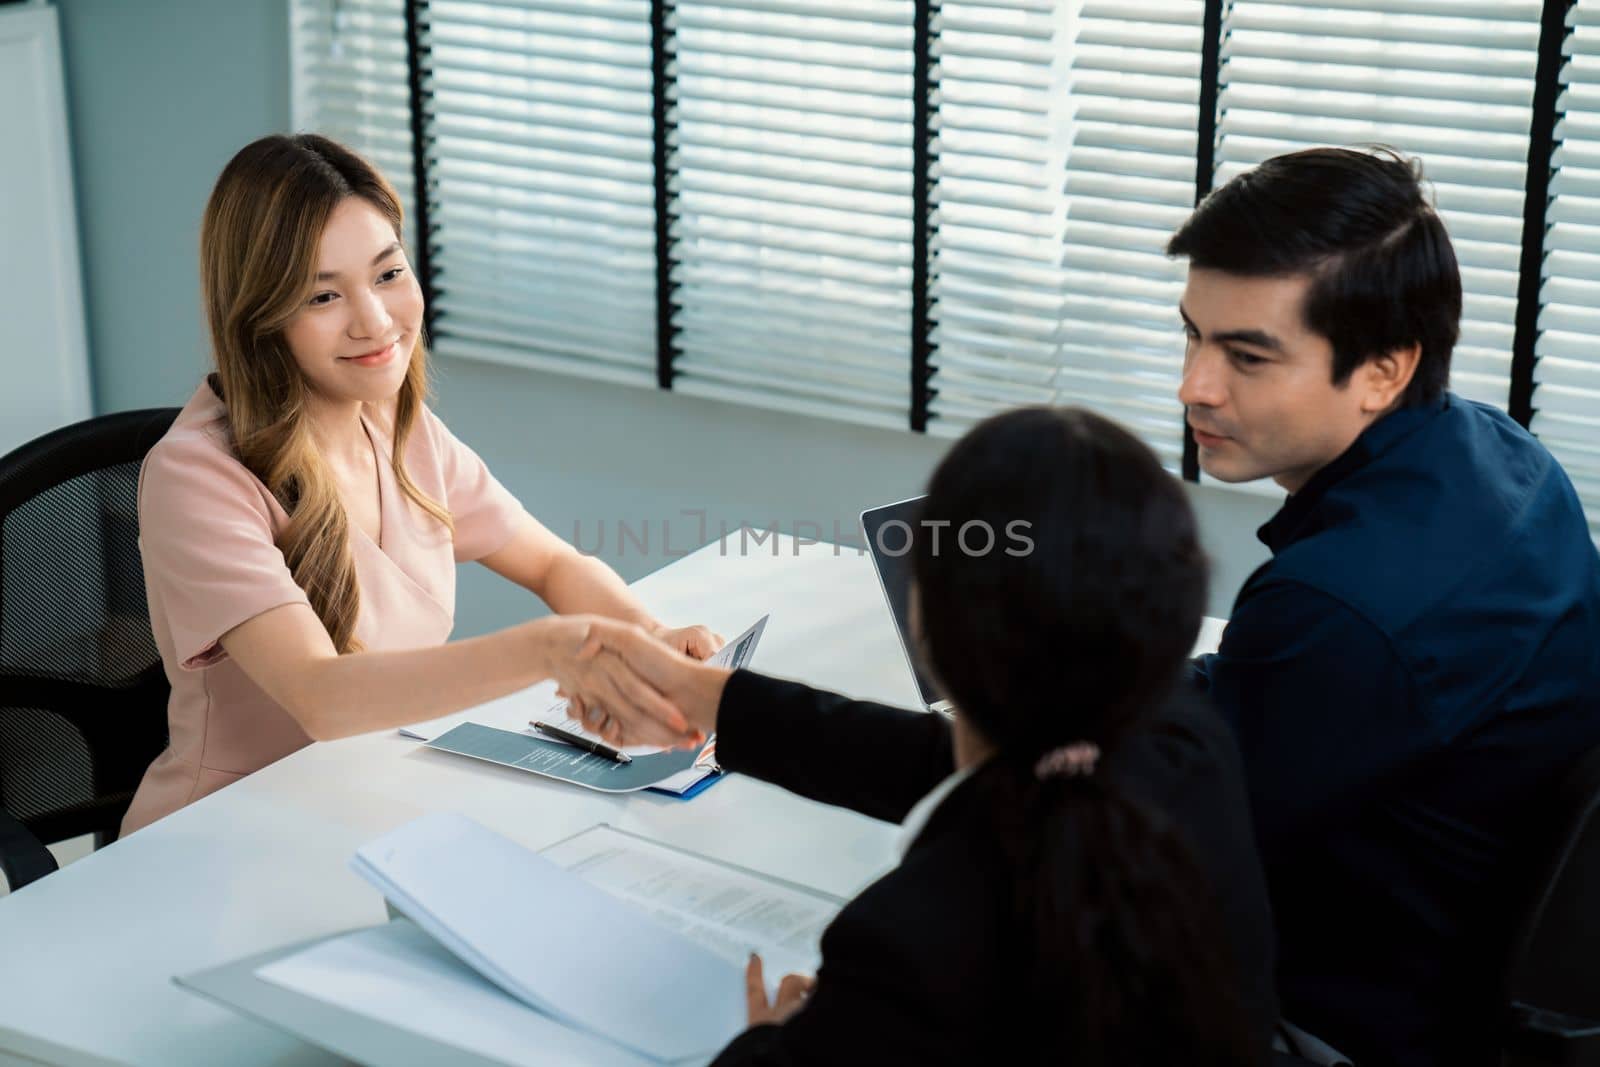 A new and competent female employee successfully interviewed. Newly graduated gets her first job after the interview.